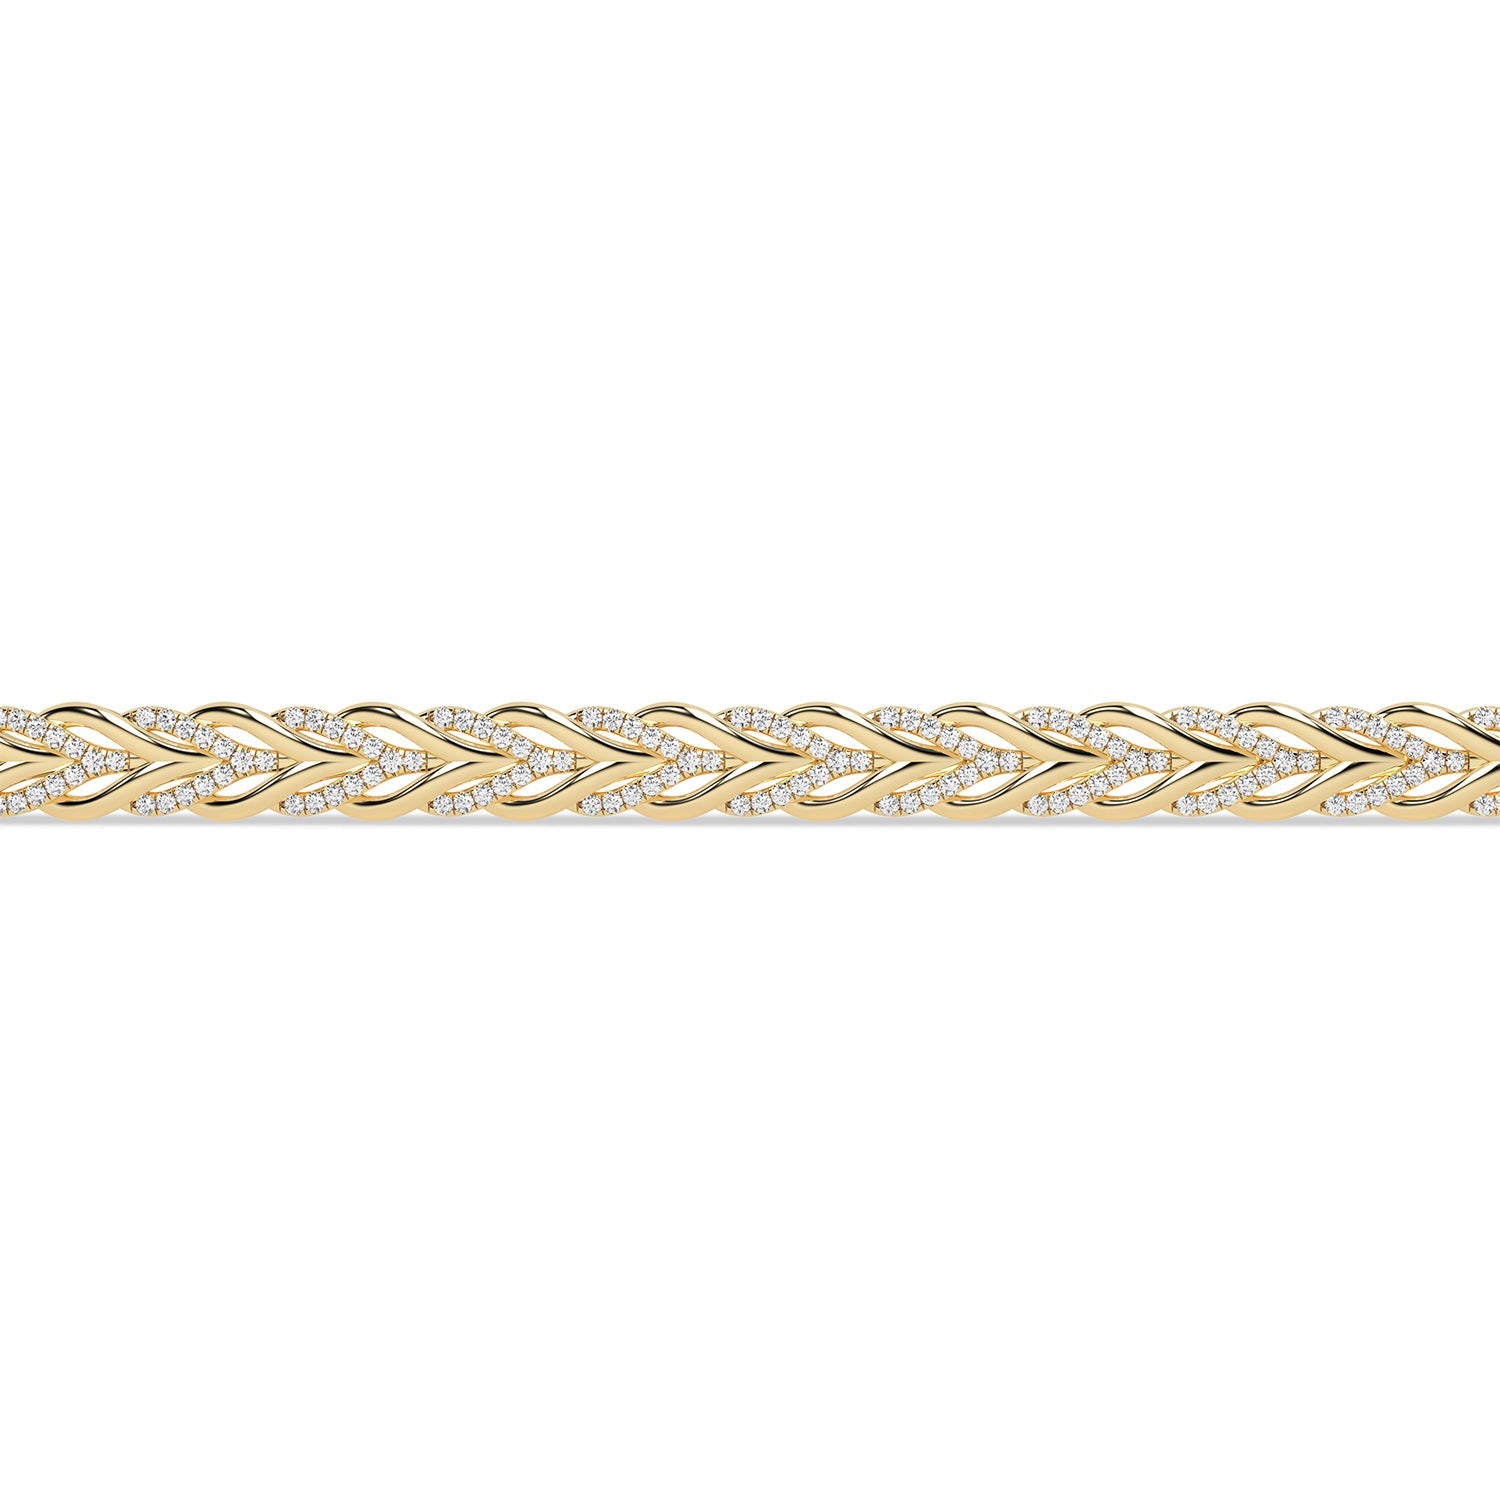 Woven Hearts Bracelet_Product Angle_1 Ct. - 3